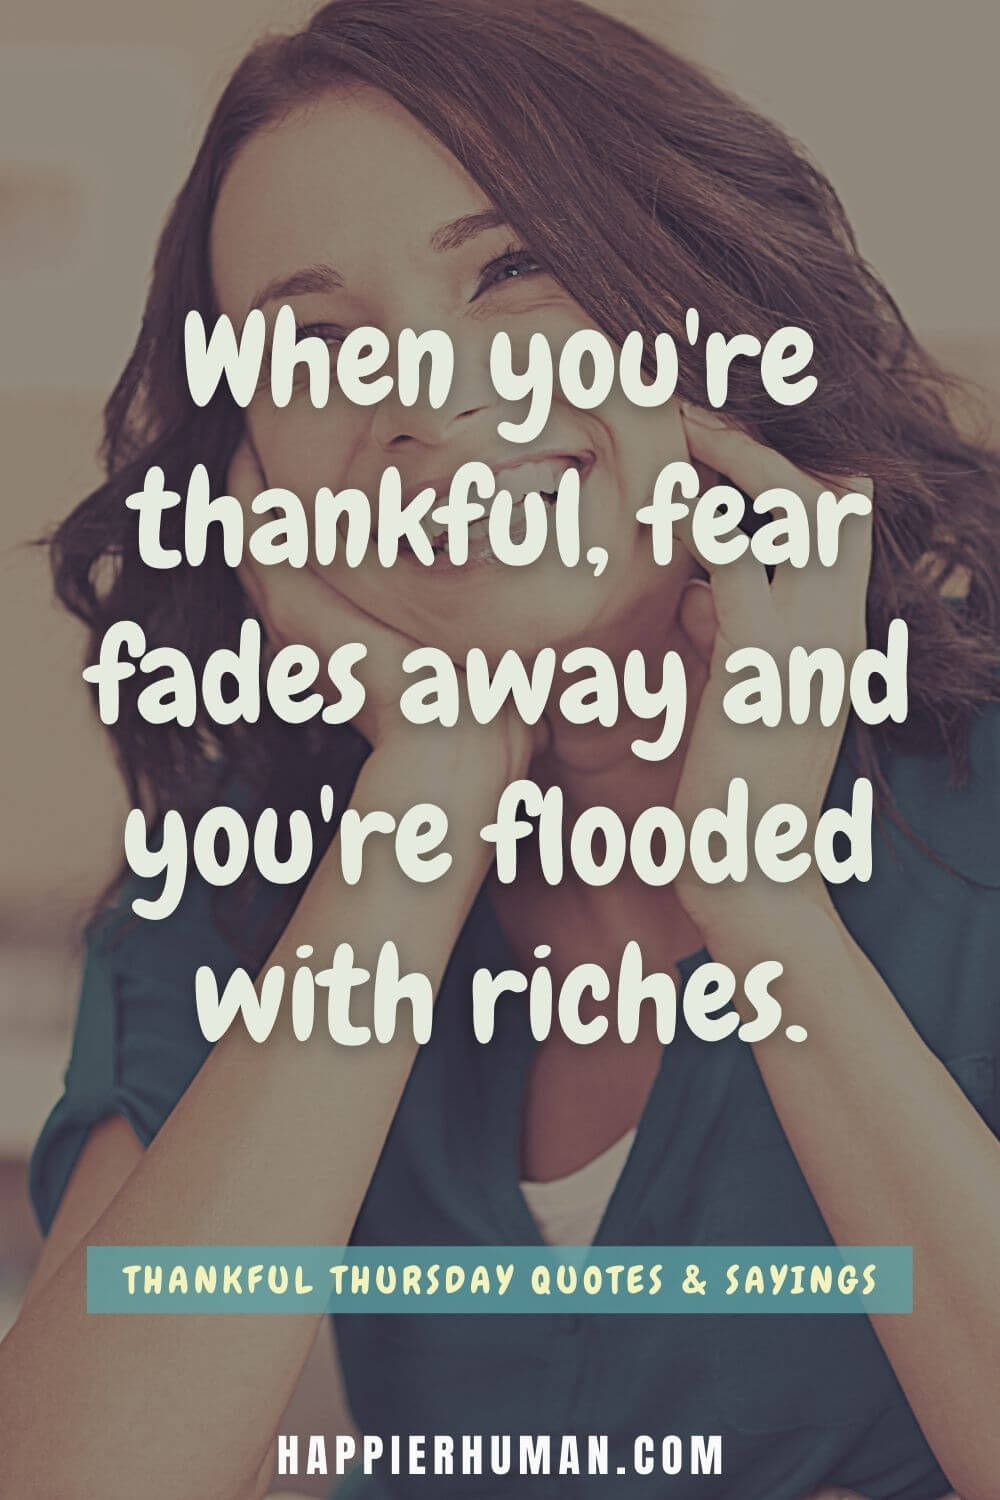 Thankful Thursday - When you're thankful, fear fades away and you're flooded with riches. | thankful thursday meme | thankful thursday ideas | thankful thursday motivational quotes